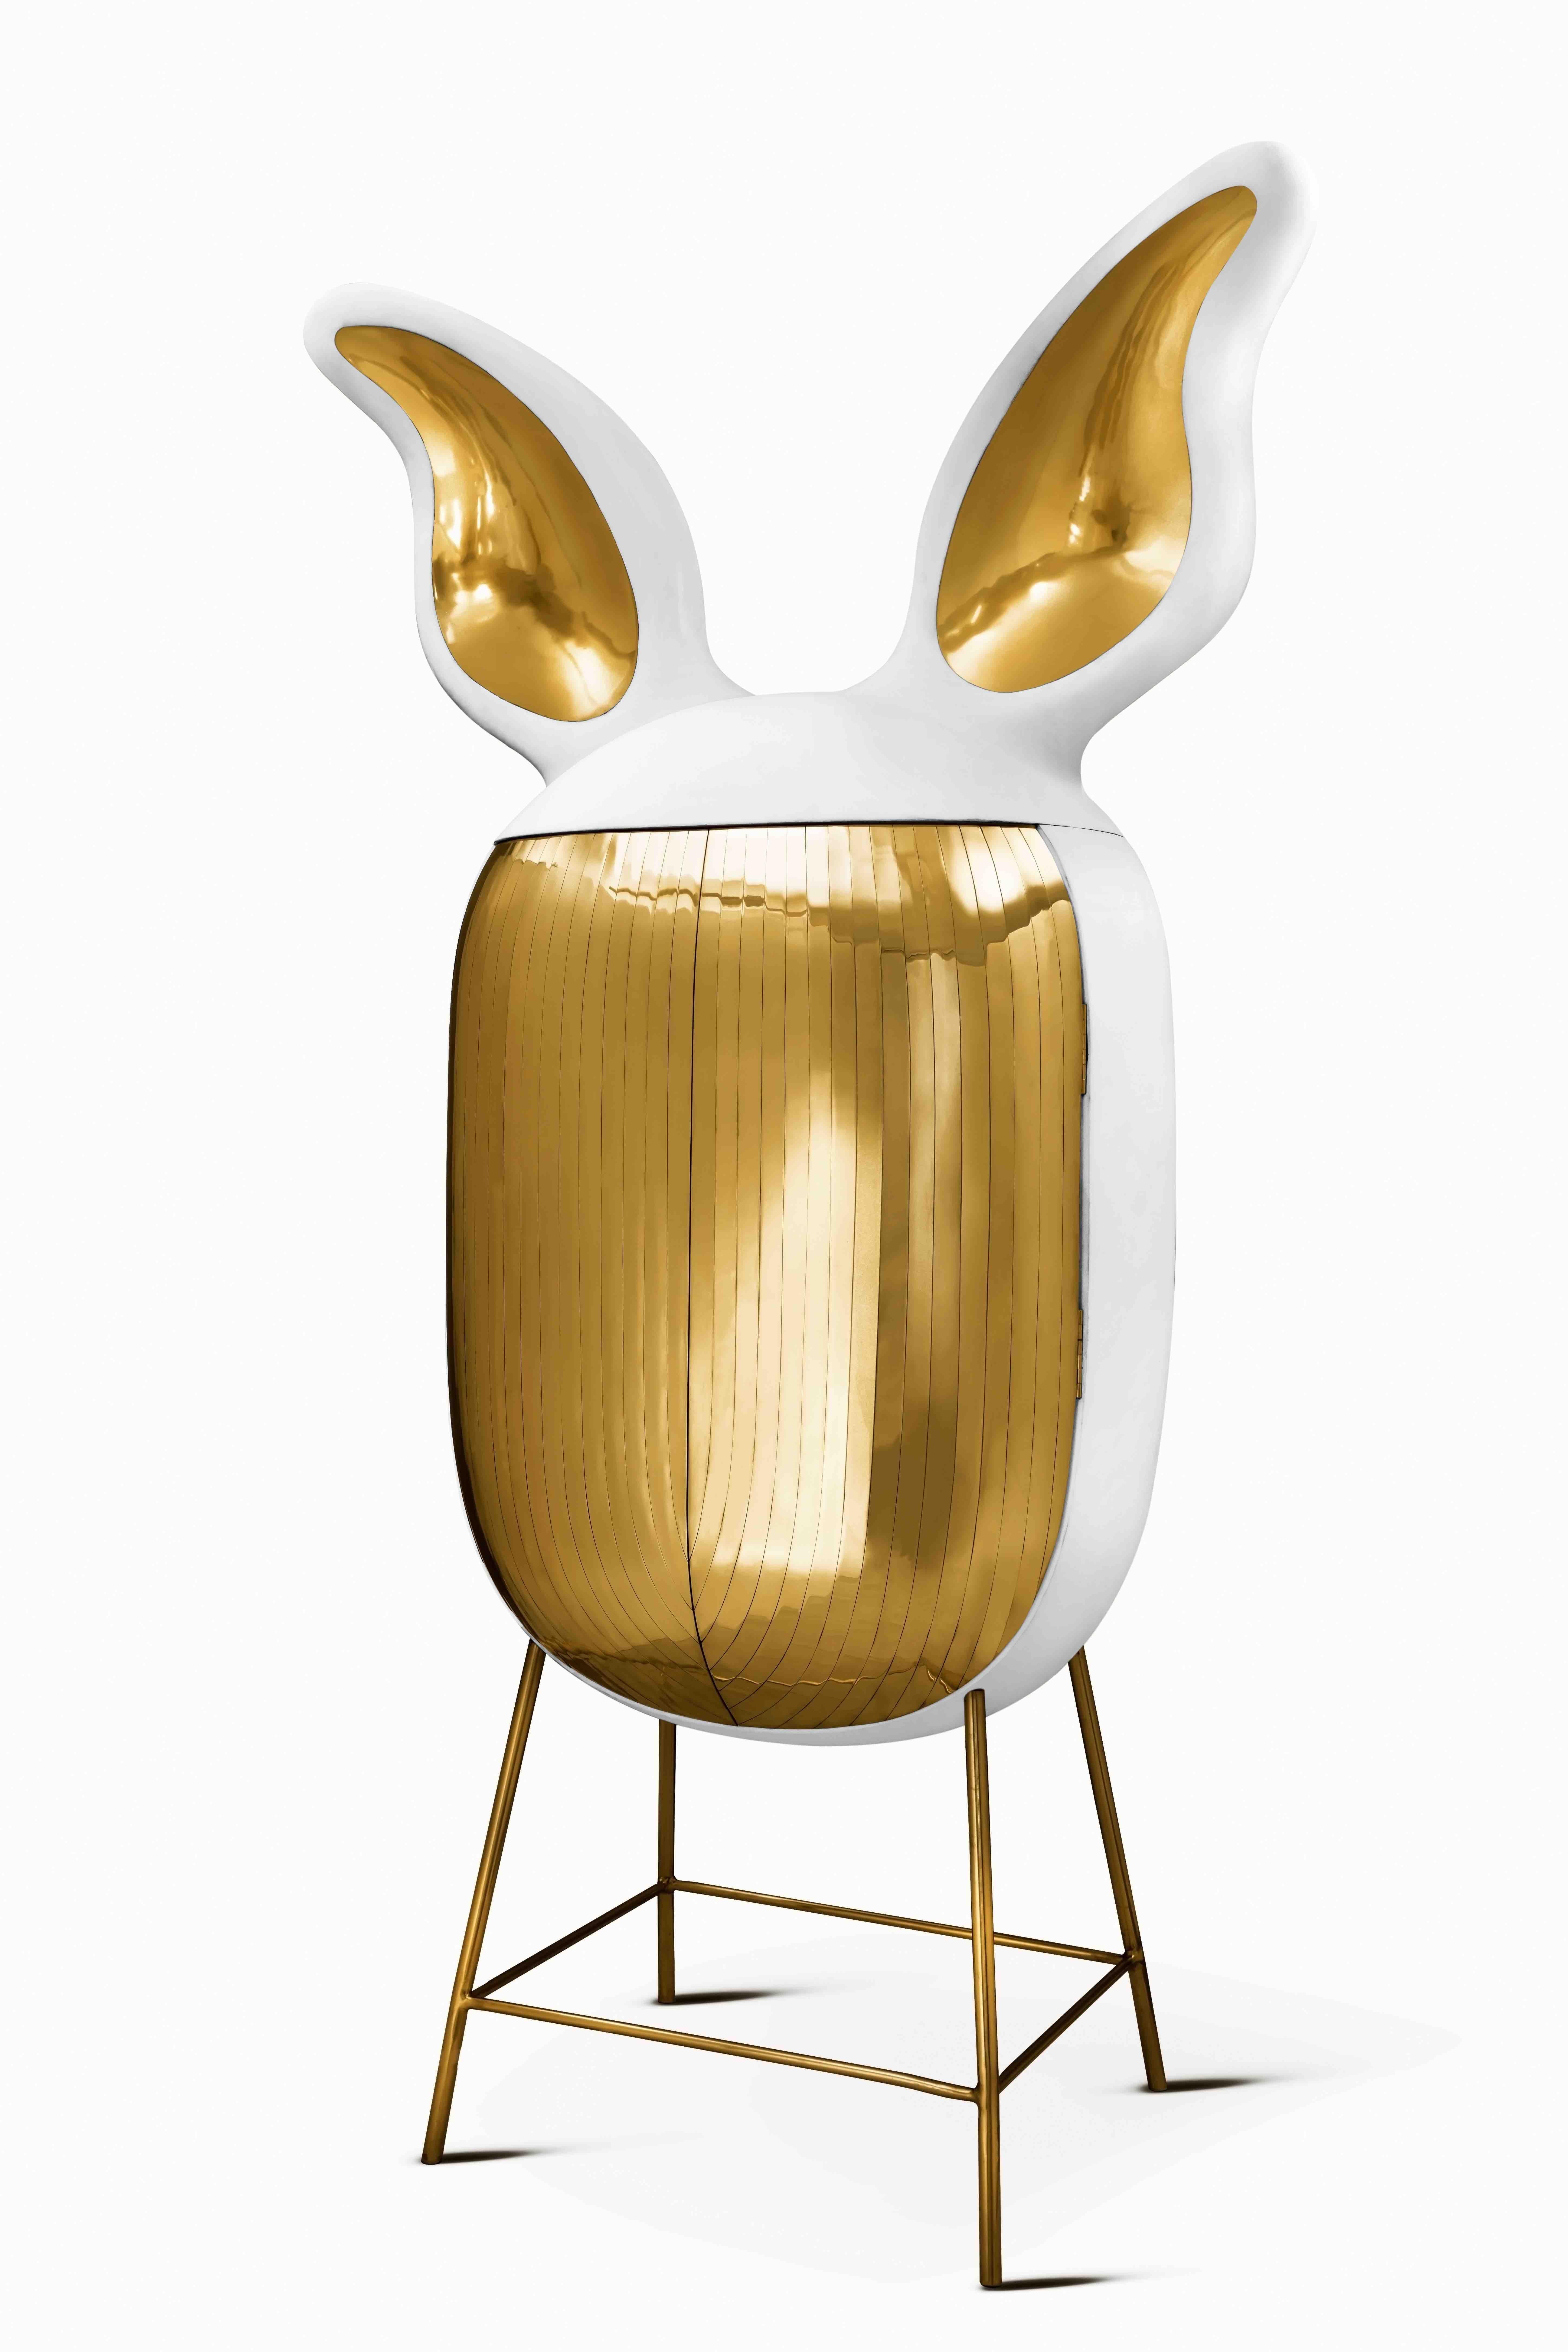 The Mimi Bar Storage Cabinet with Brass Inlay by Matteo Cibic is a plump white cabinet with giant ears and tall dainty legs. Rich brass trims add opulence. A charming statement piece in any interior space.

“Until one has loved an animal, a part of